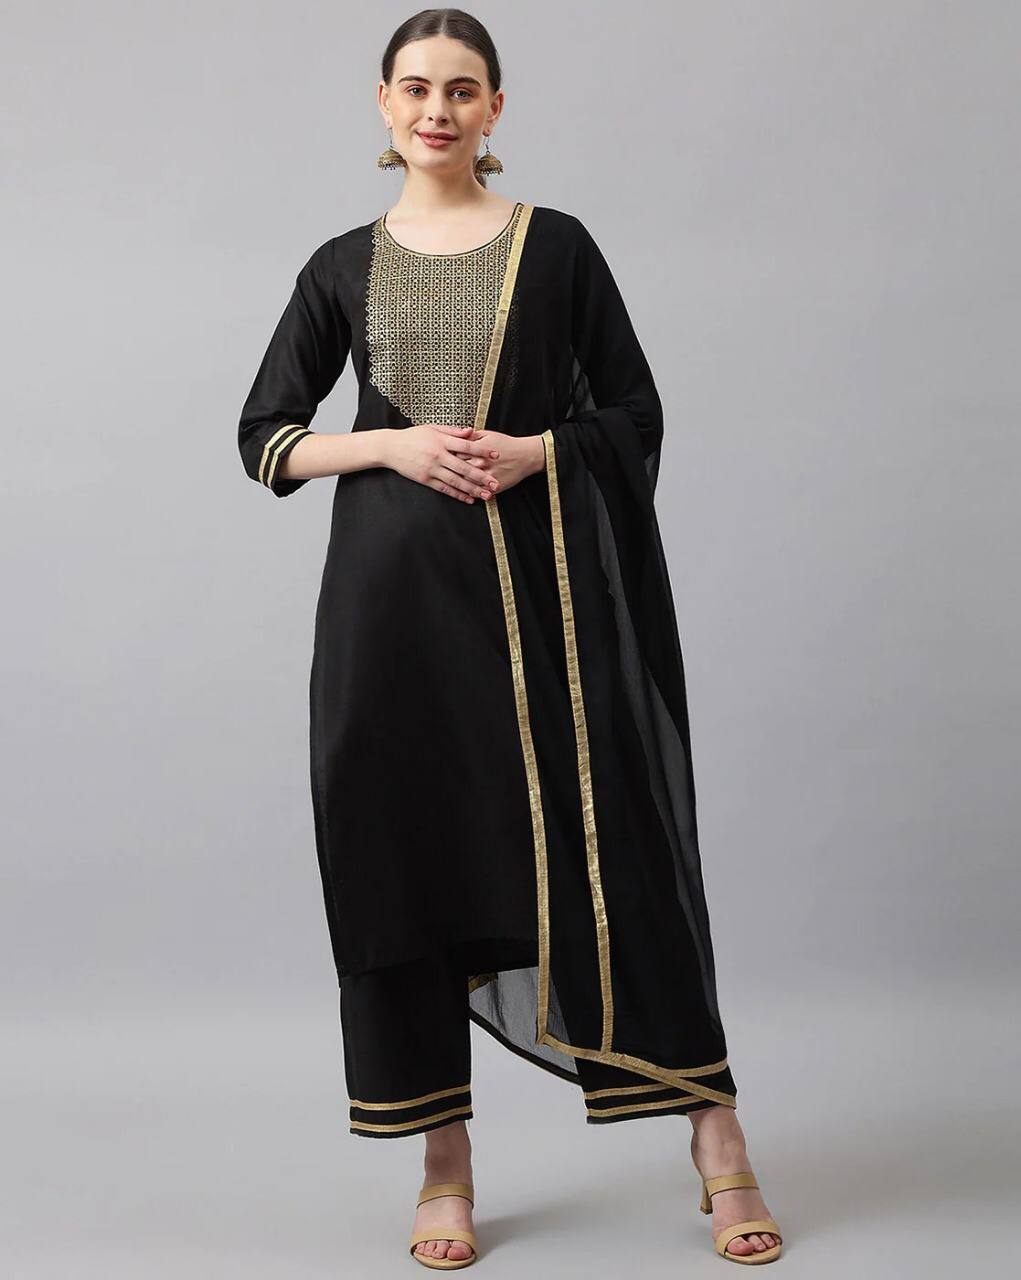 Pleasing Black Color Rayon Embroidered Zari Work Style Ready Made Salwar Suit